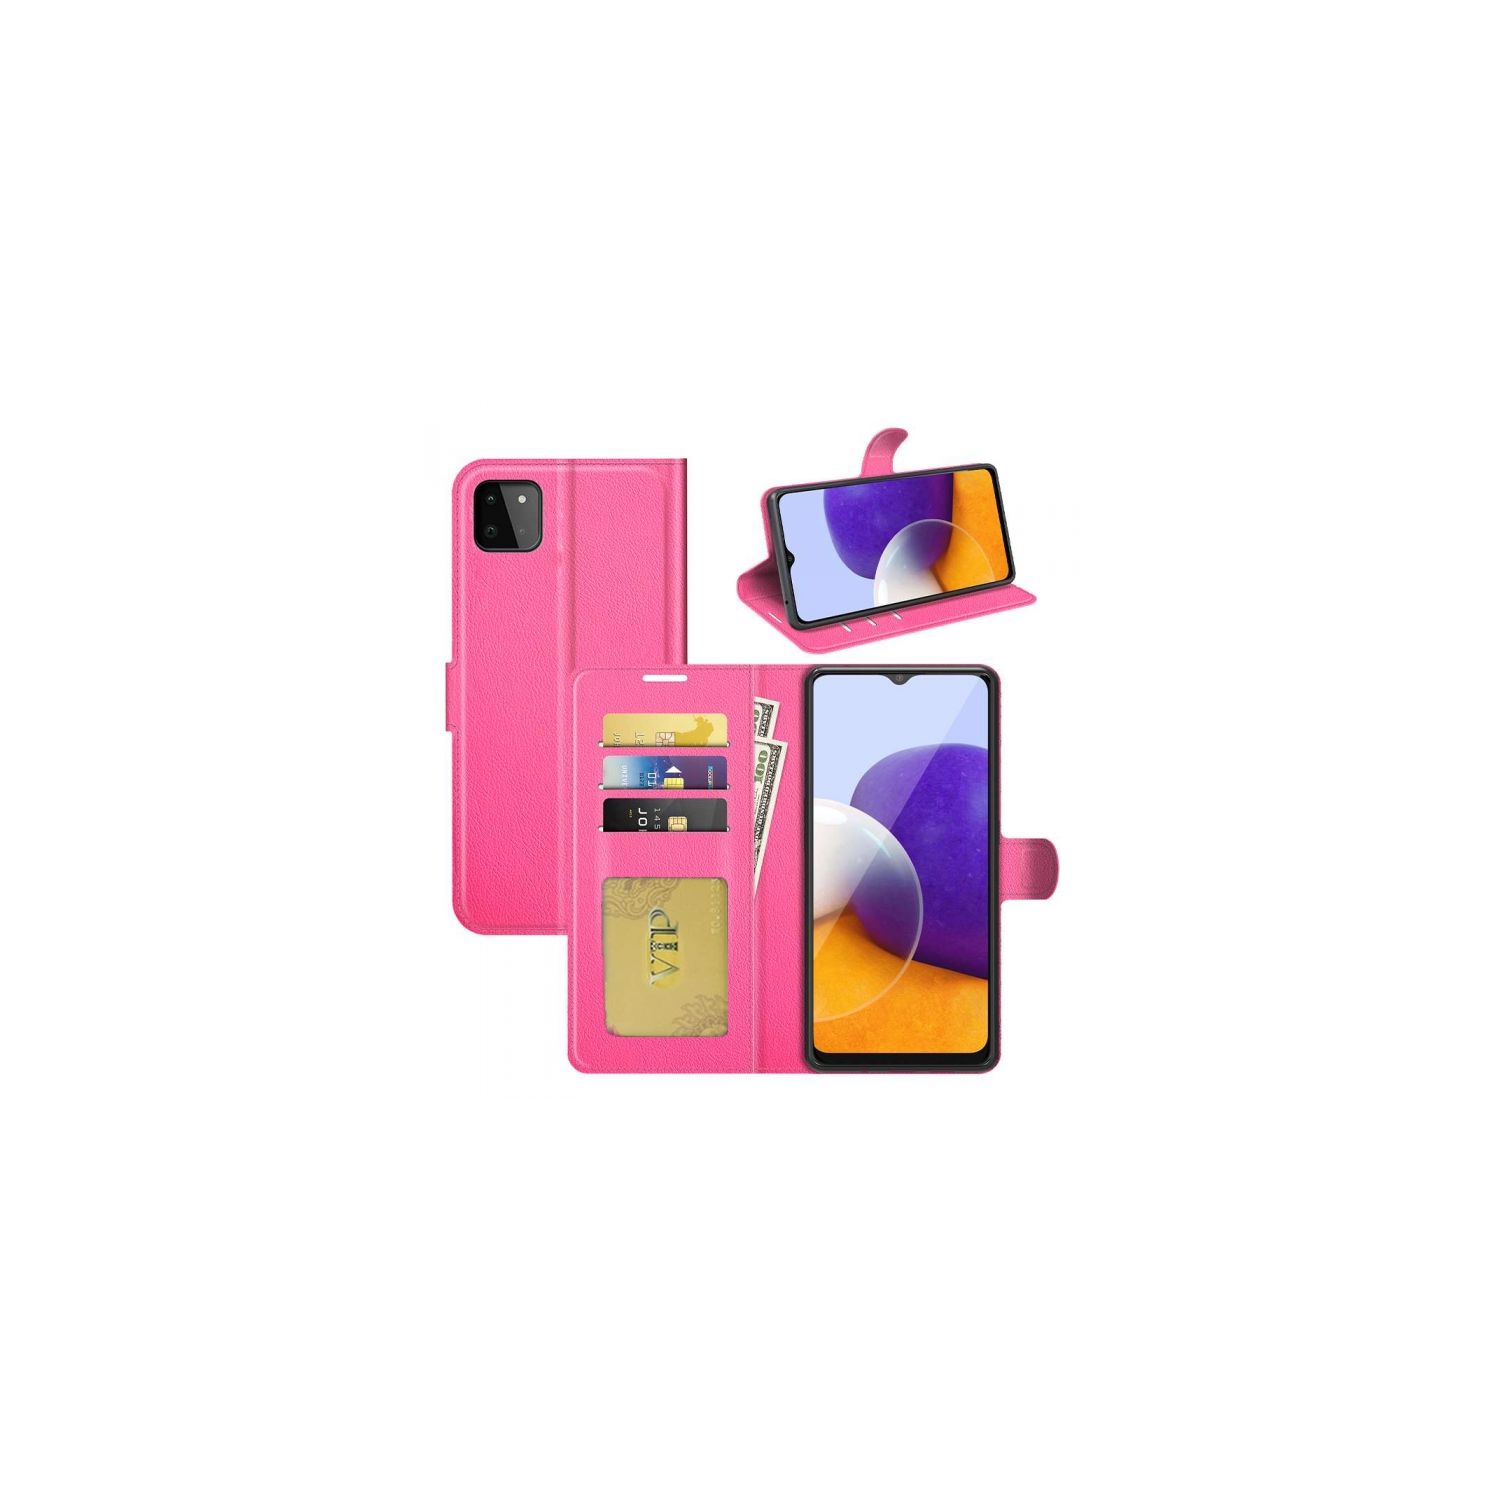 [CS] Samsung Galaxy A22 5G Case, Magnetic Leather Folio Wallet Flip Case Cover with Card Slot, Hot Pink